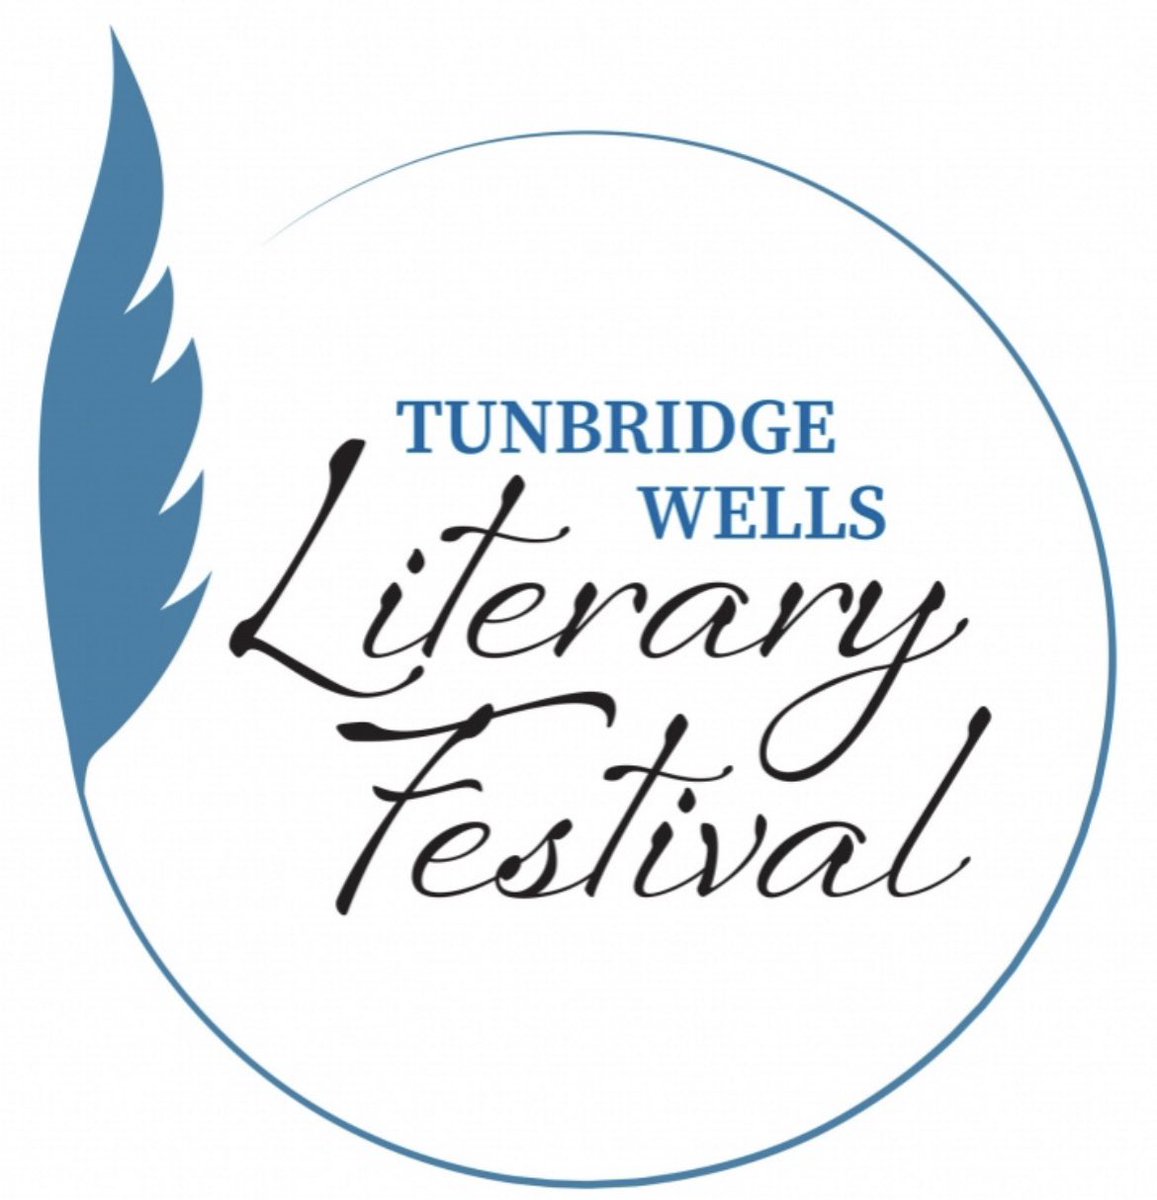 It’s Day 1 of the TW Lit Fest!! Make sure to check out the full list of events and authors in our digital programme and secure your seat as soon as possible! issuu.com/twbc-culture/d… @BerryLamberts @rtwtogether @ace_national Maxipay Accounting